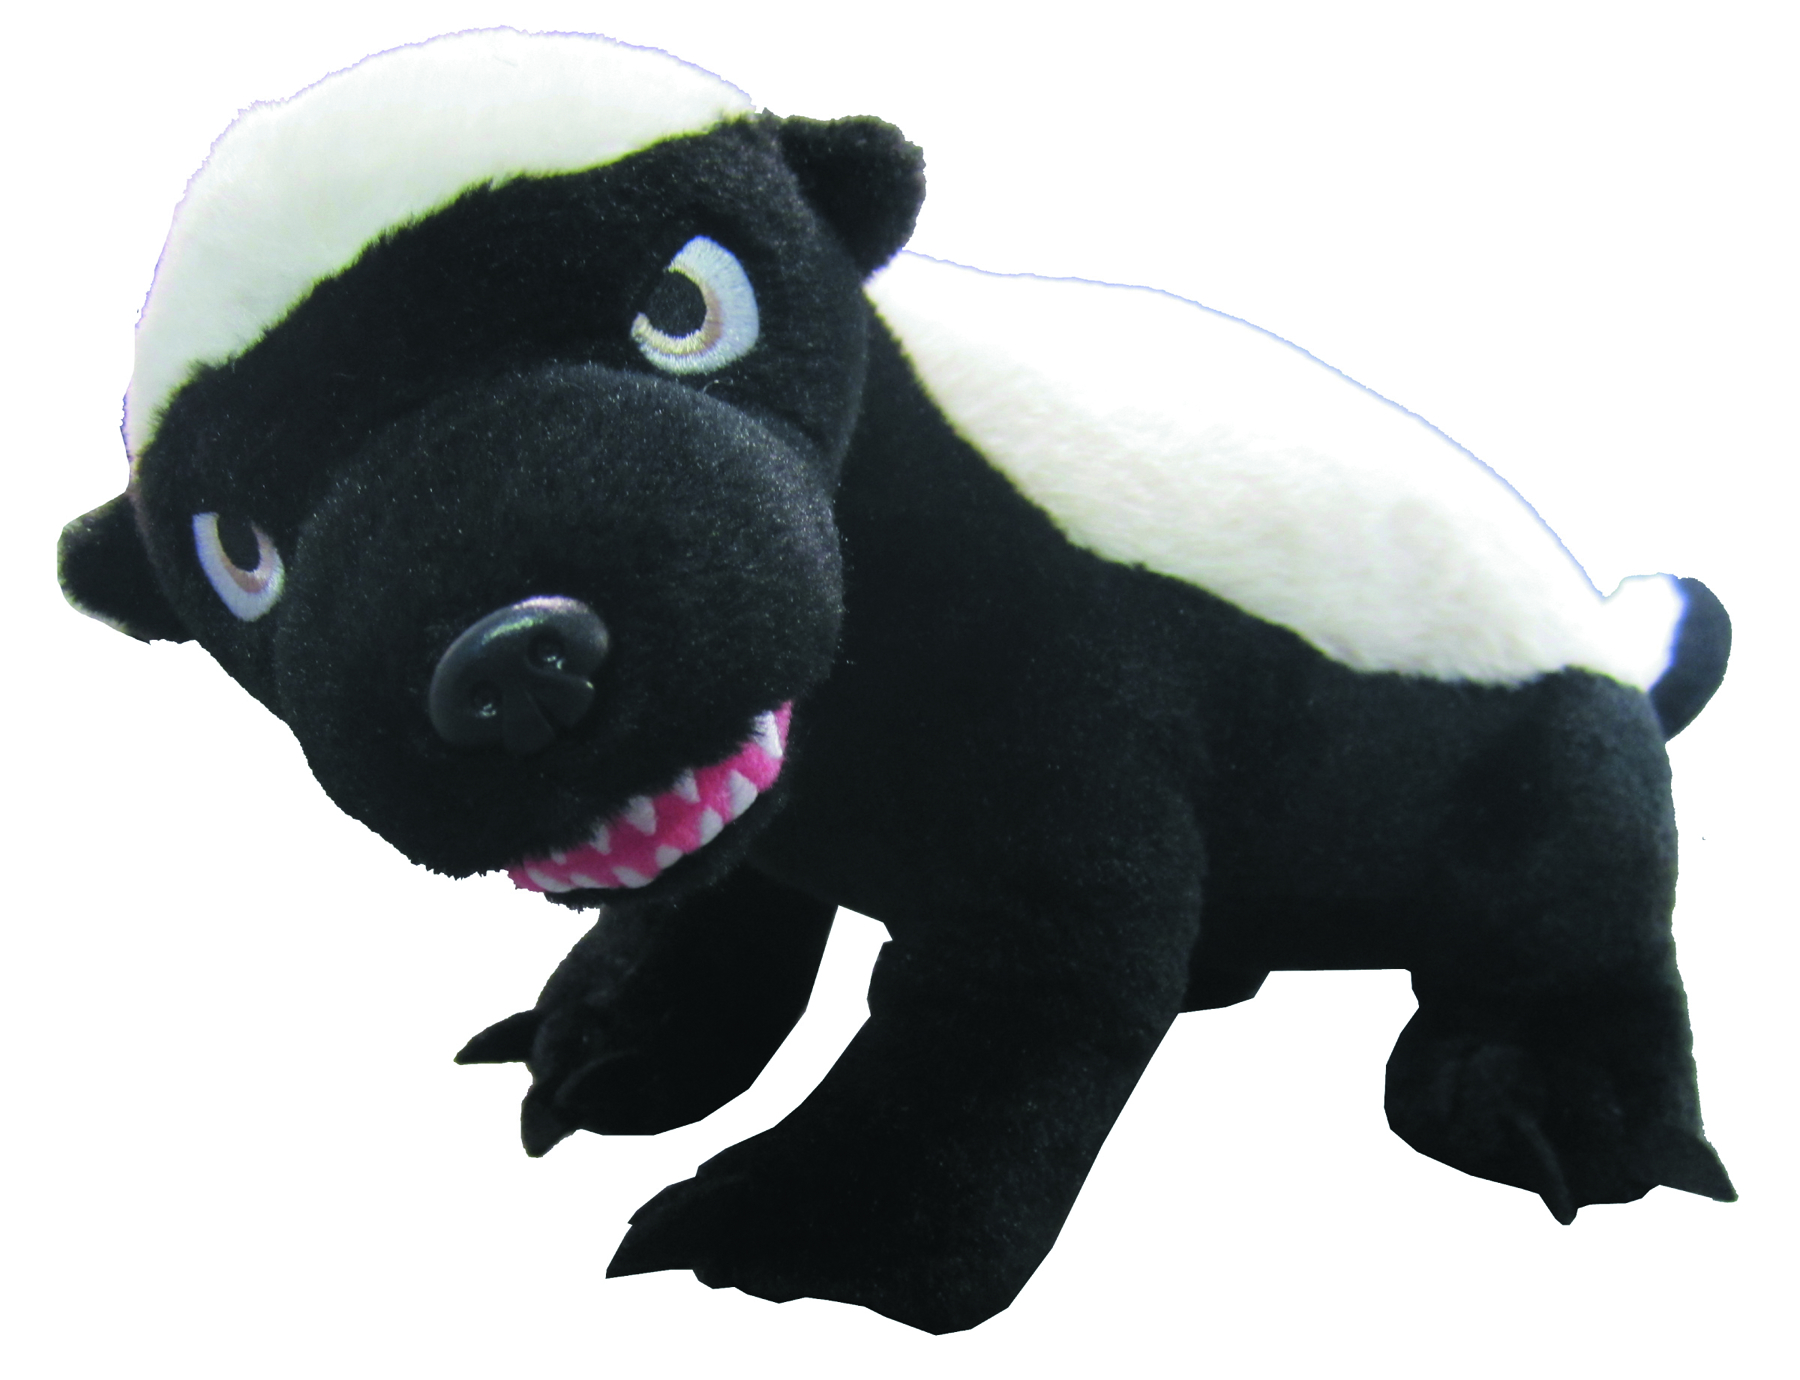 stuffed badger toy